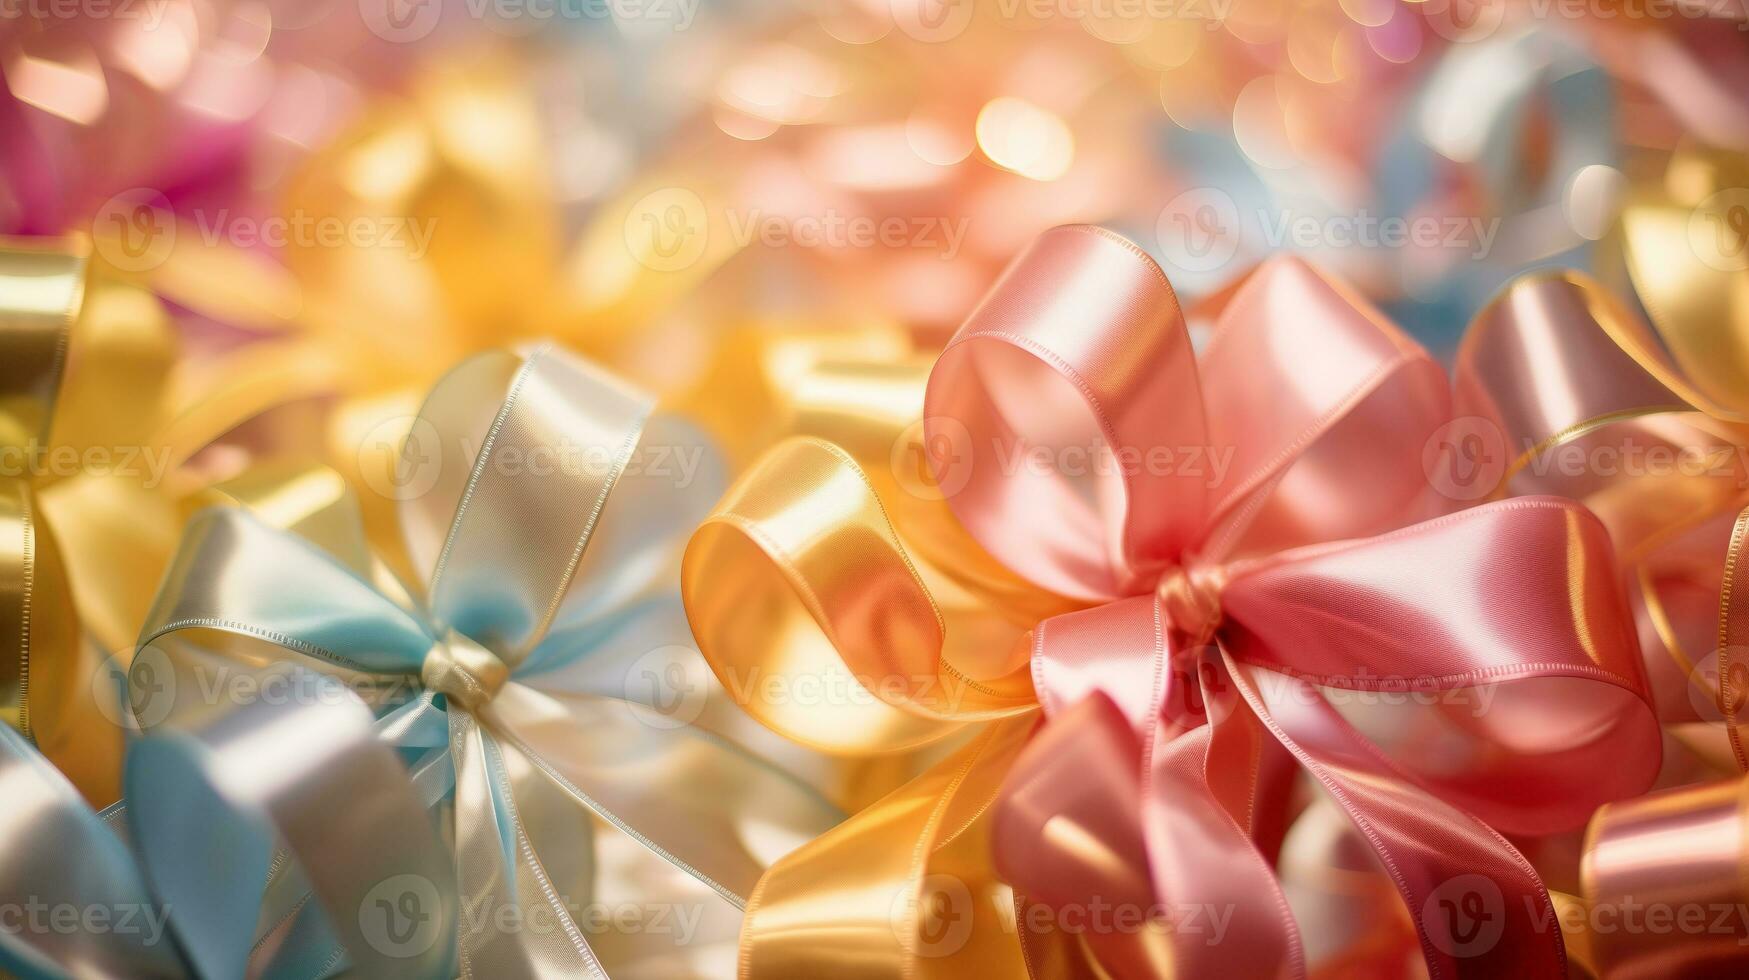 Colorful ribbon for gift box to celebrate holiday. Paper for gift boxes prepared for holiday celebrations. photo